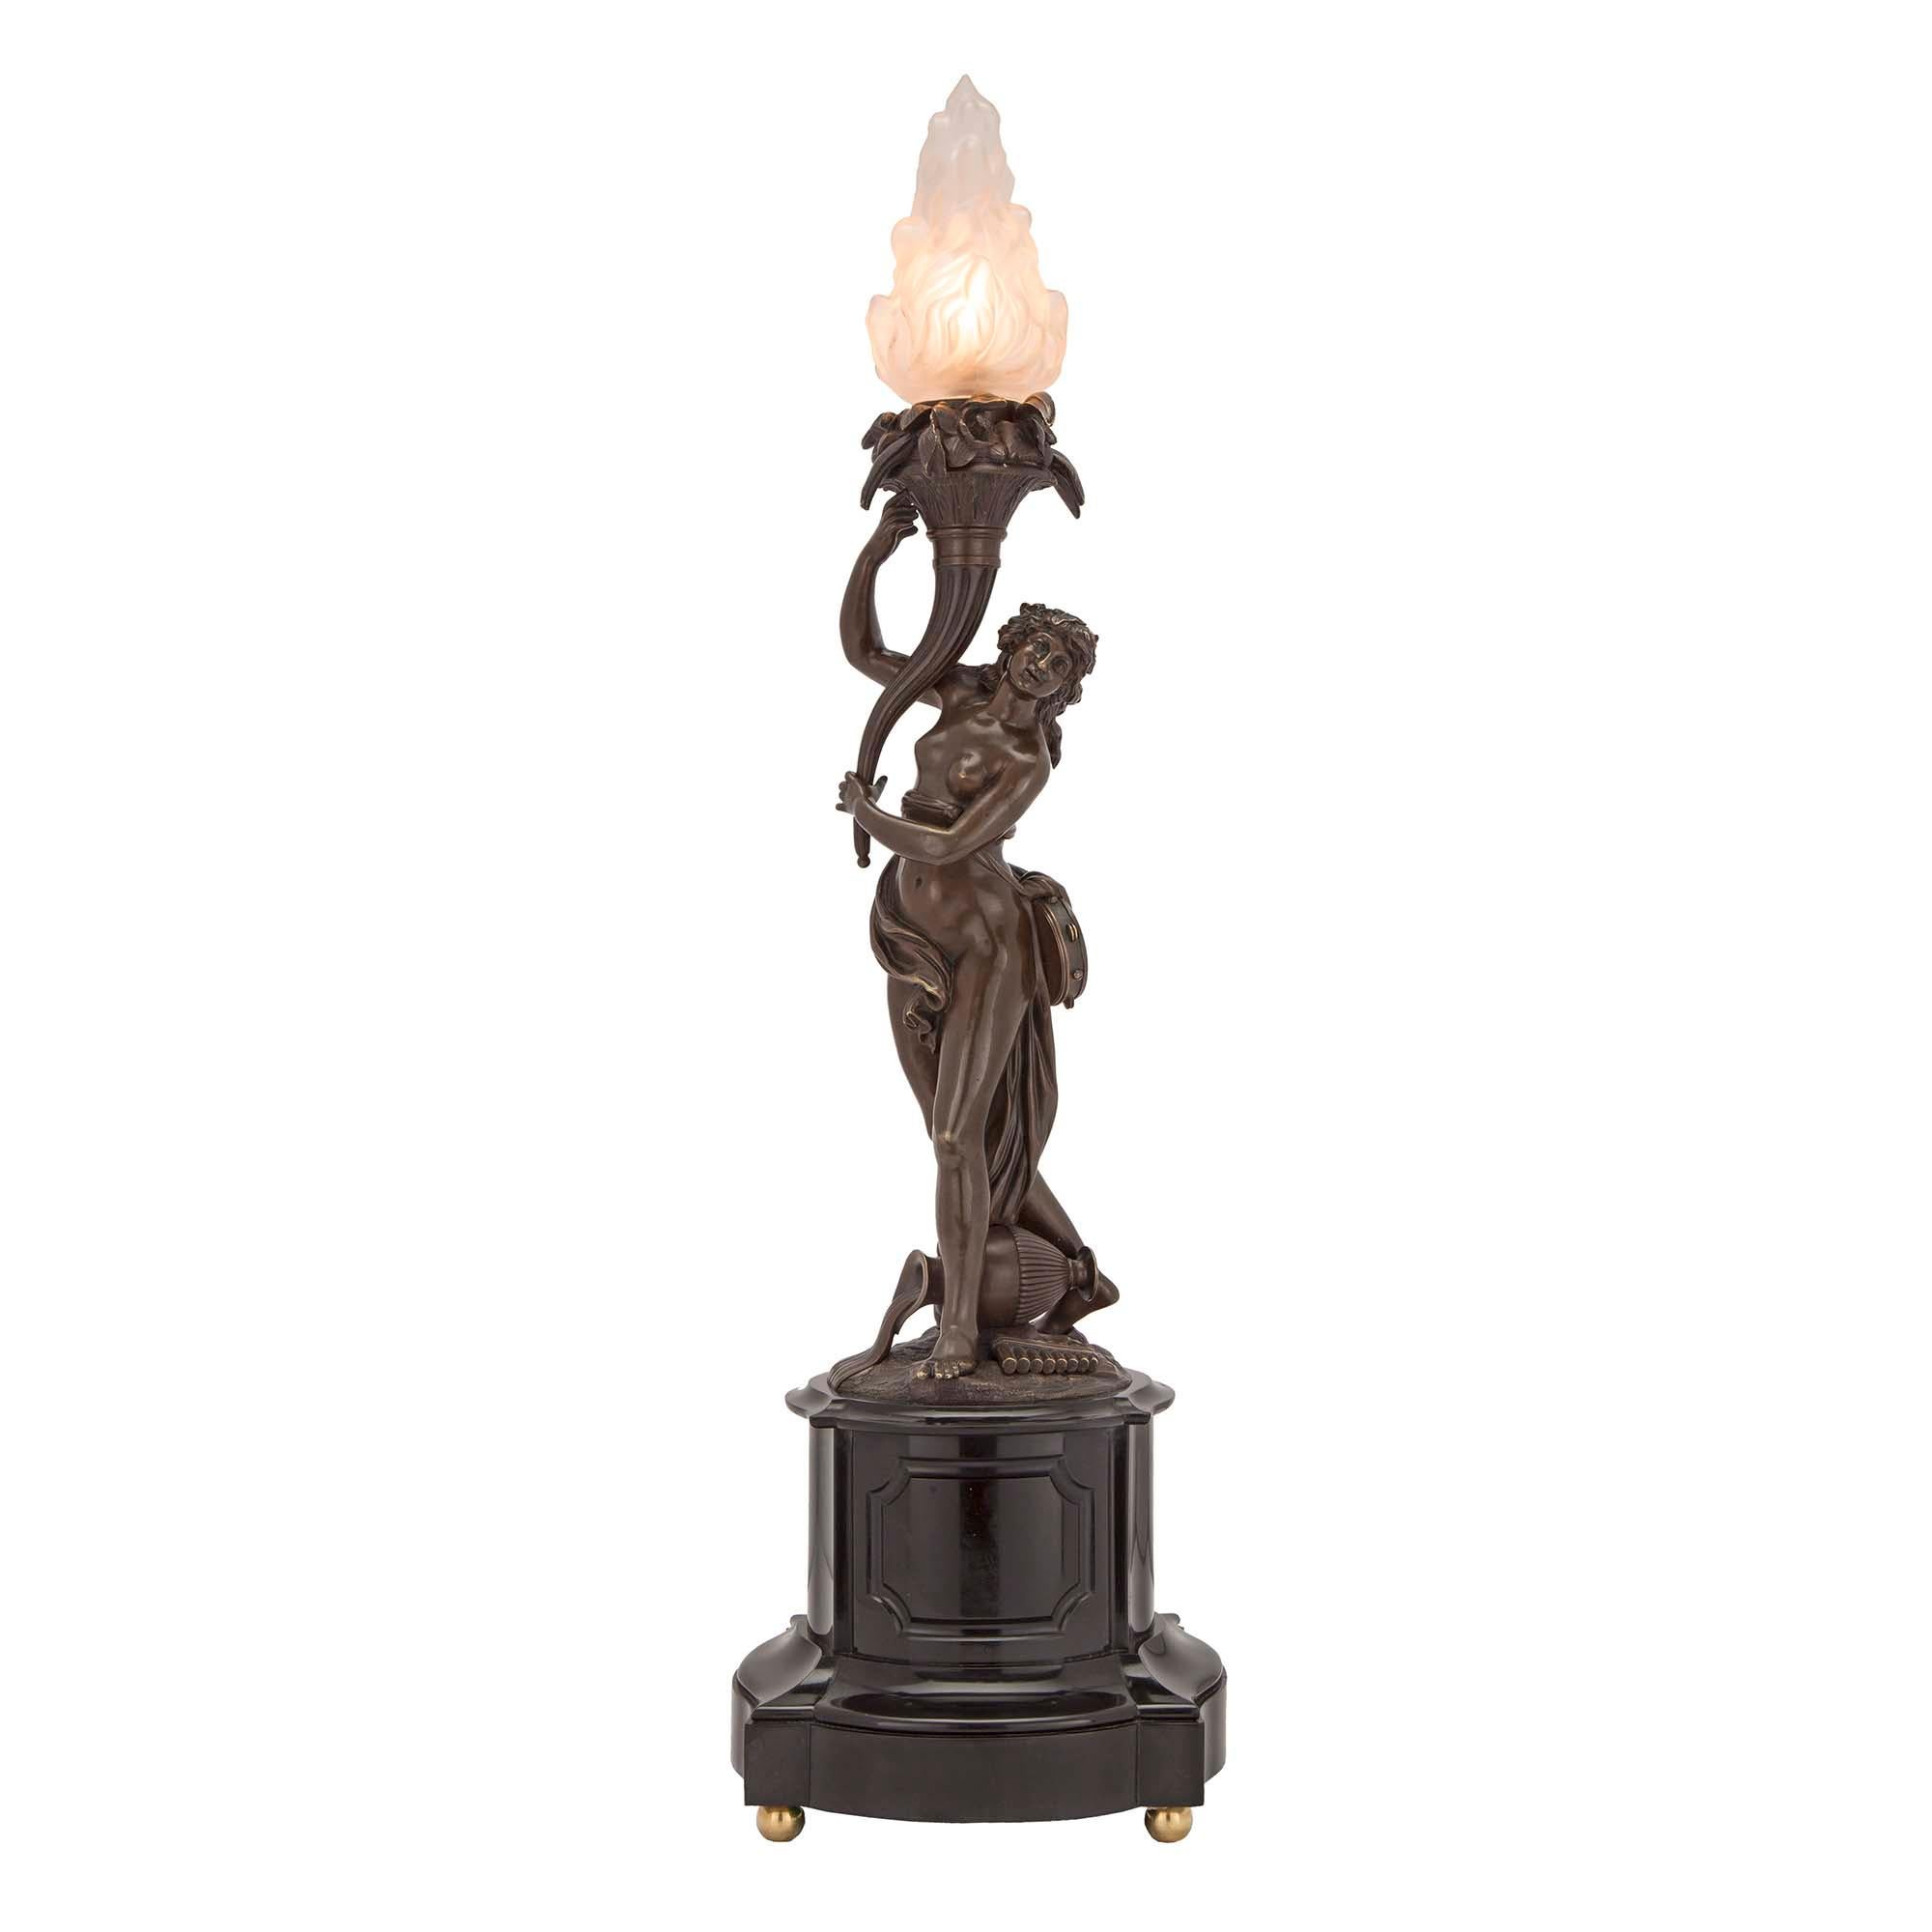 A handsome and most elegant true pair of French 19th century Neo-Classical patinated bronze and black Belgian marble lamps. Each lamp is raised by a square mottled marble base with convex sides and a decorative carved recessed center. Above are